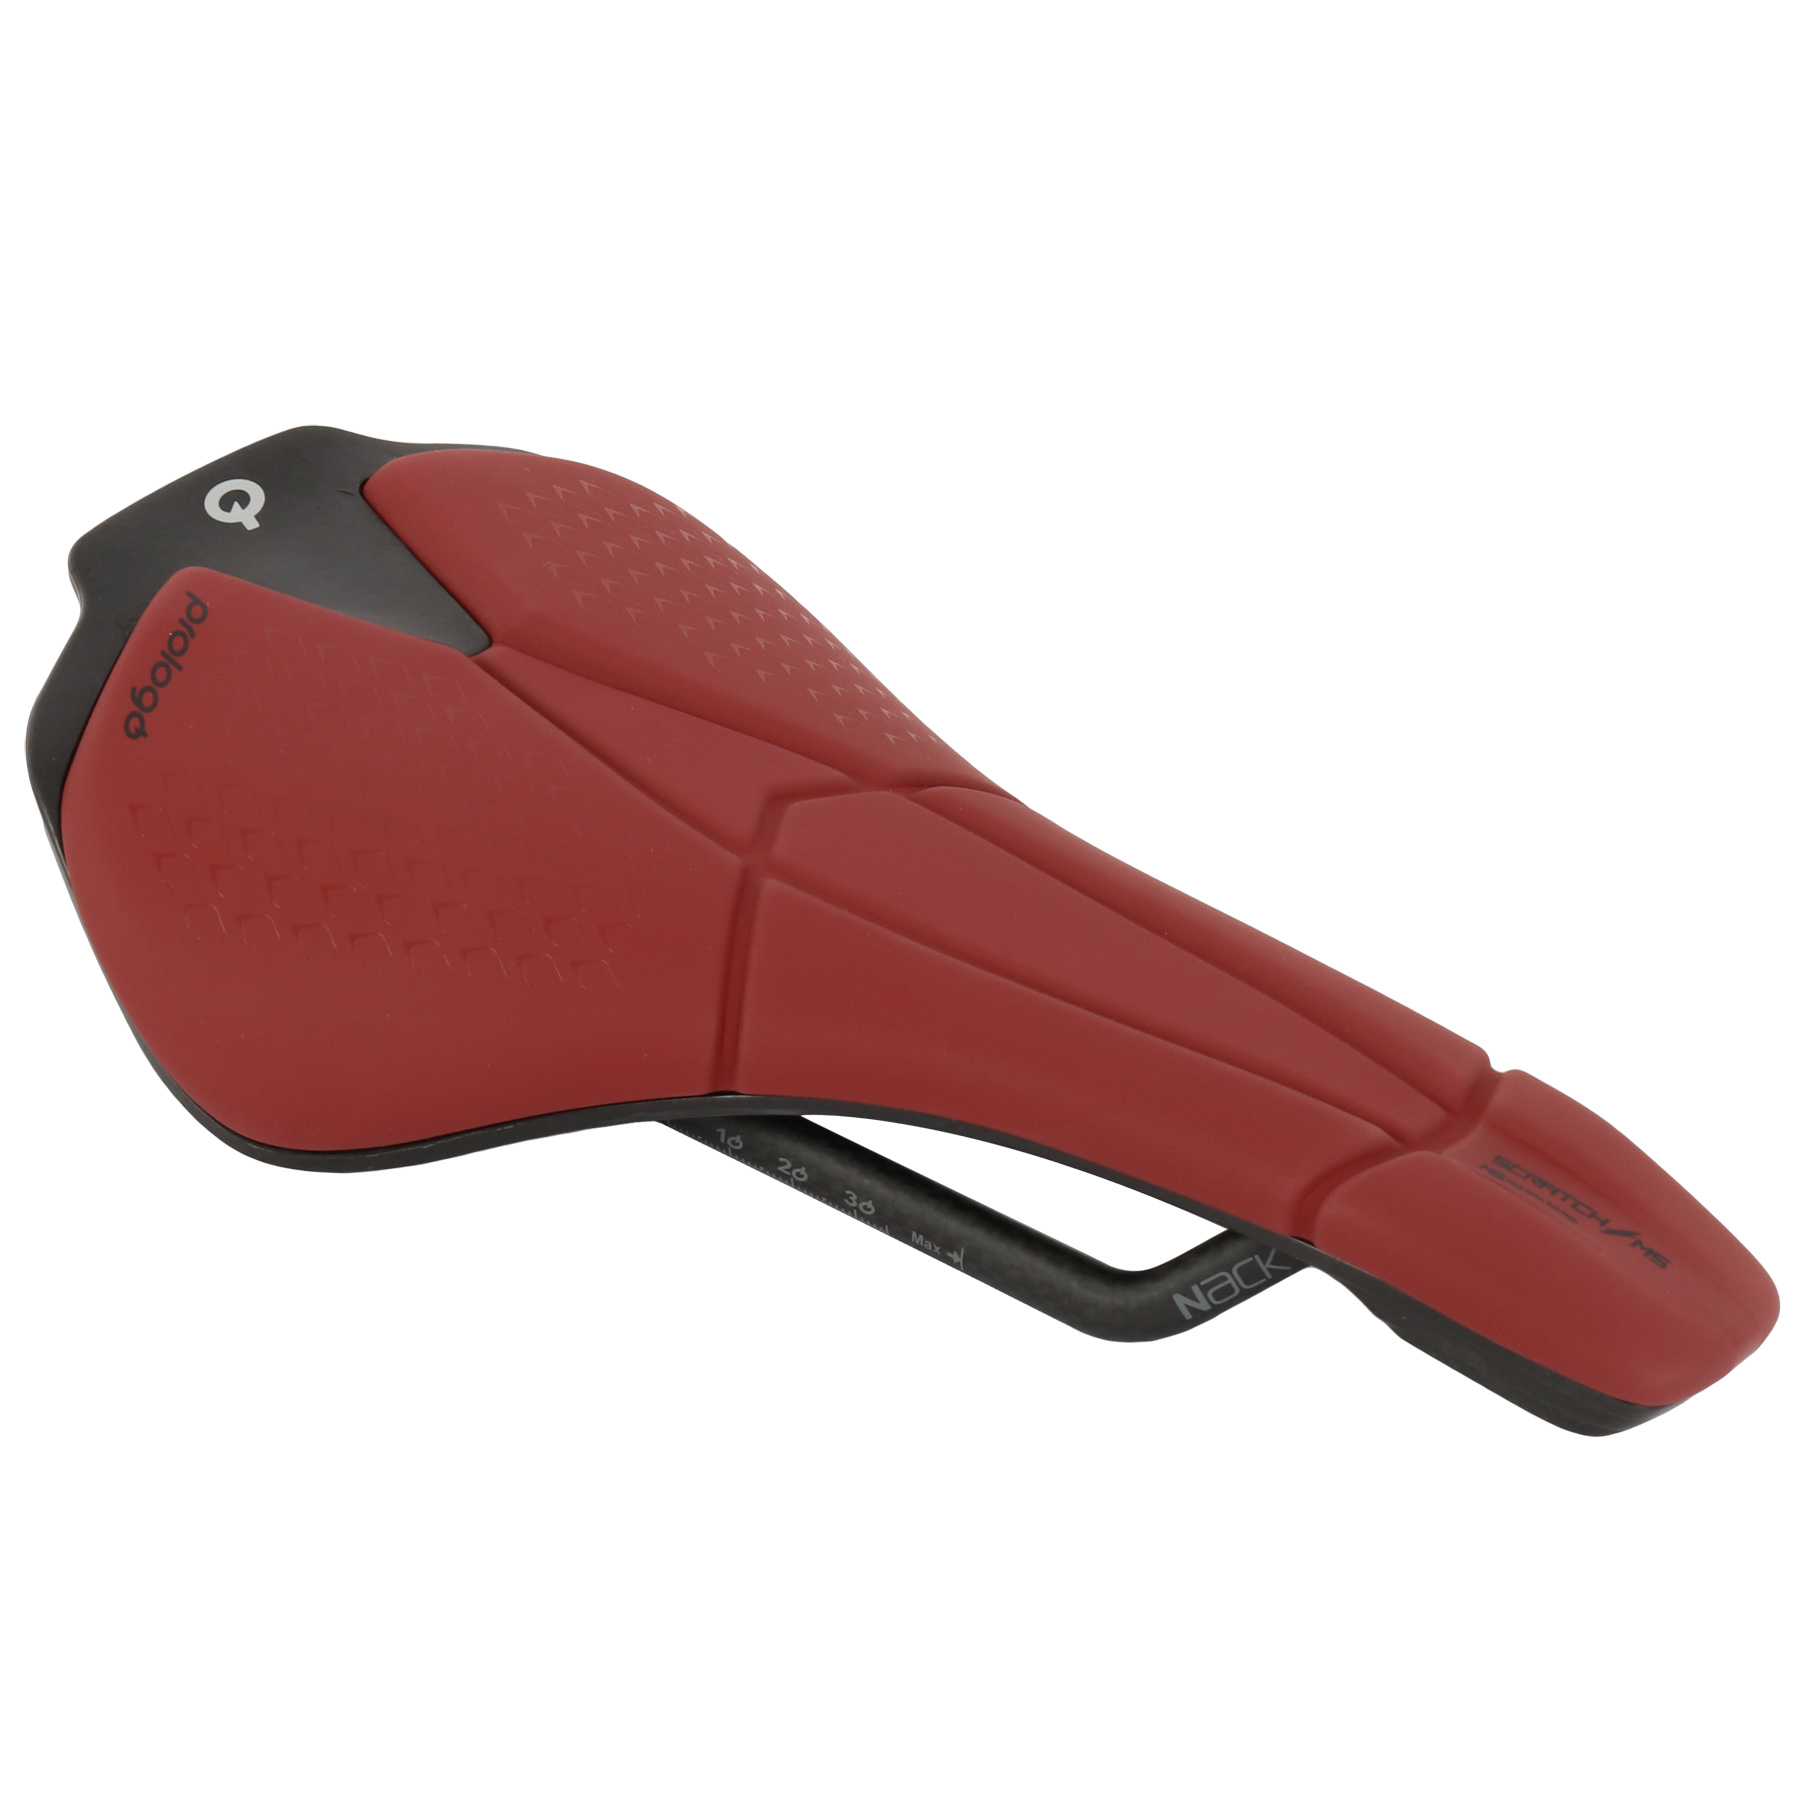 Productfoto van Prologo Scratch M5 Special Edition Nack Saddle - red rust